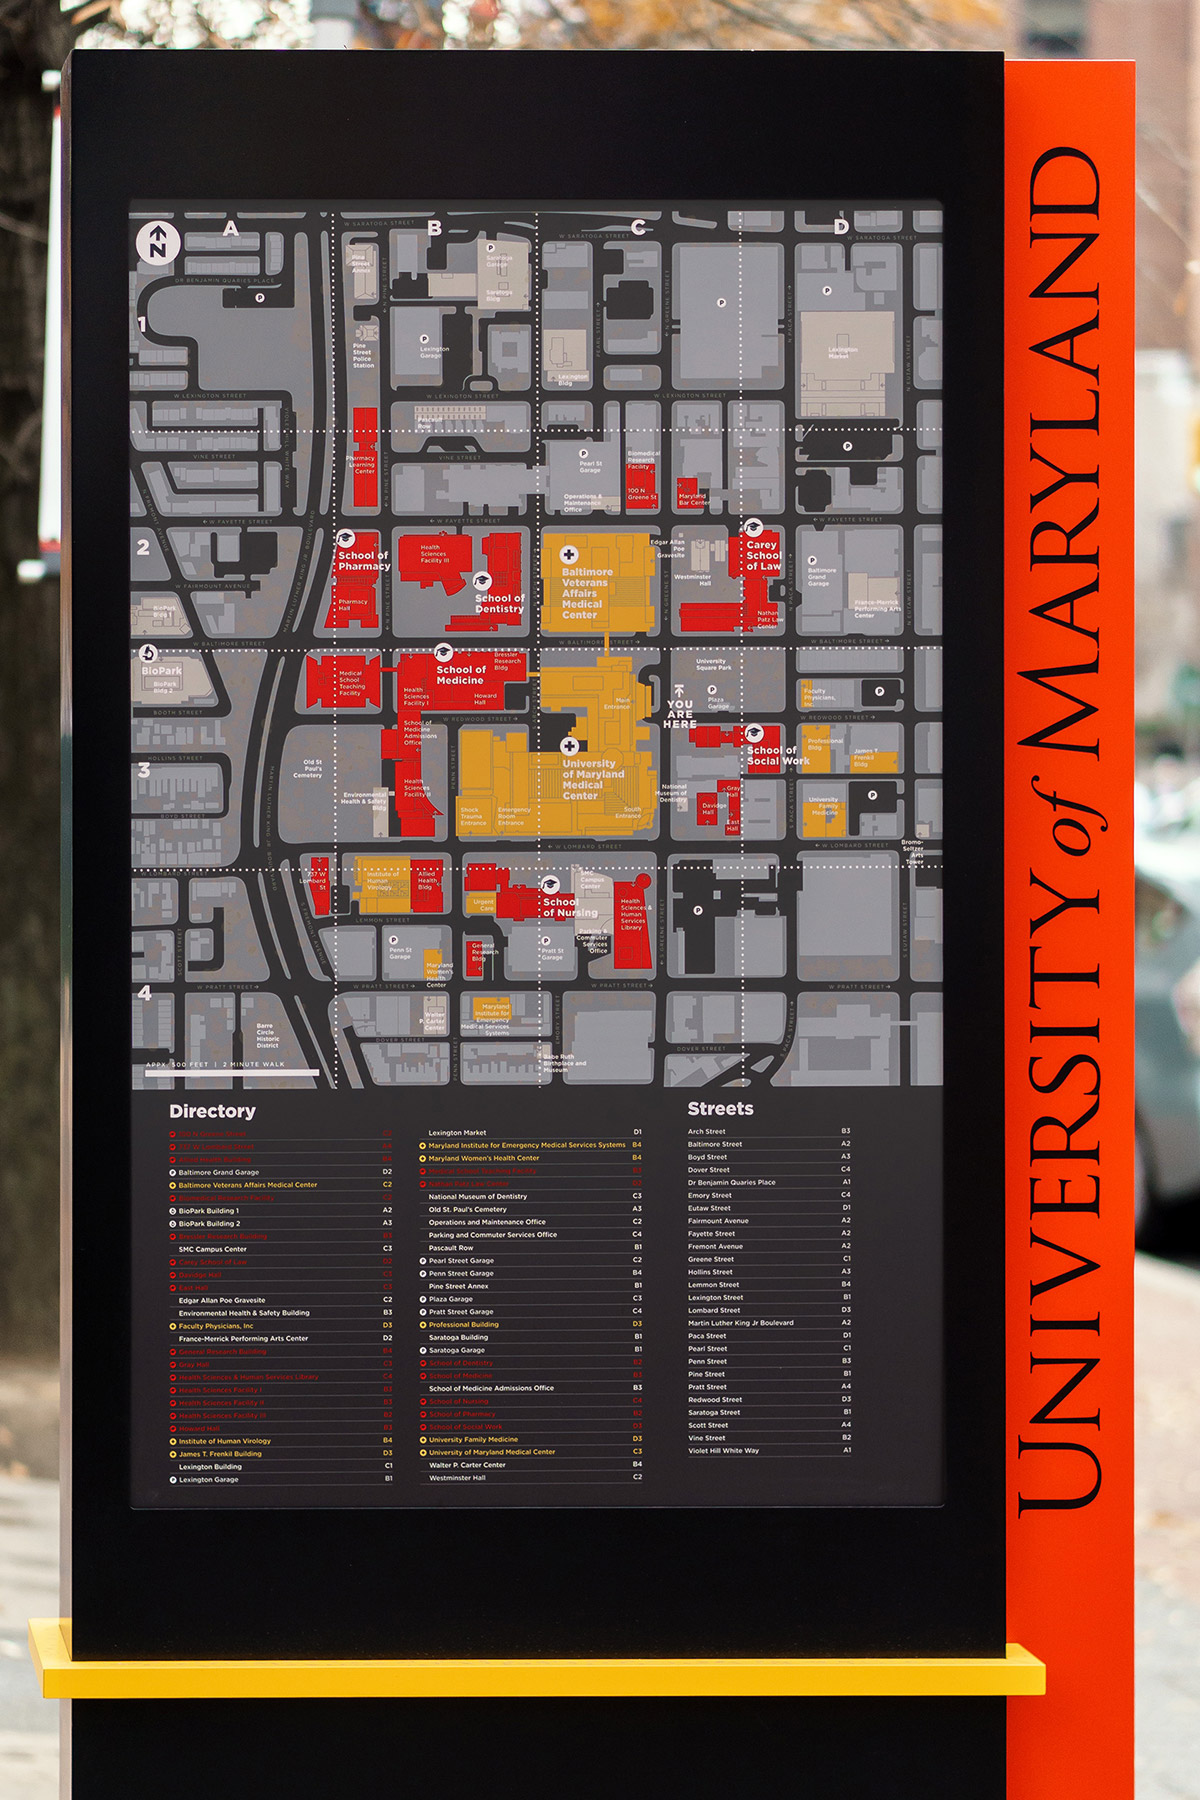 Mapping for The University of Maryland